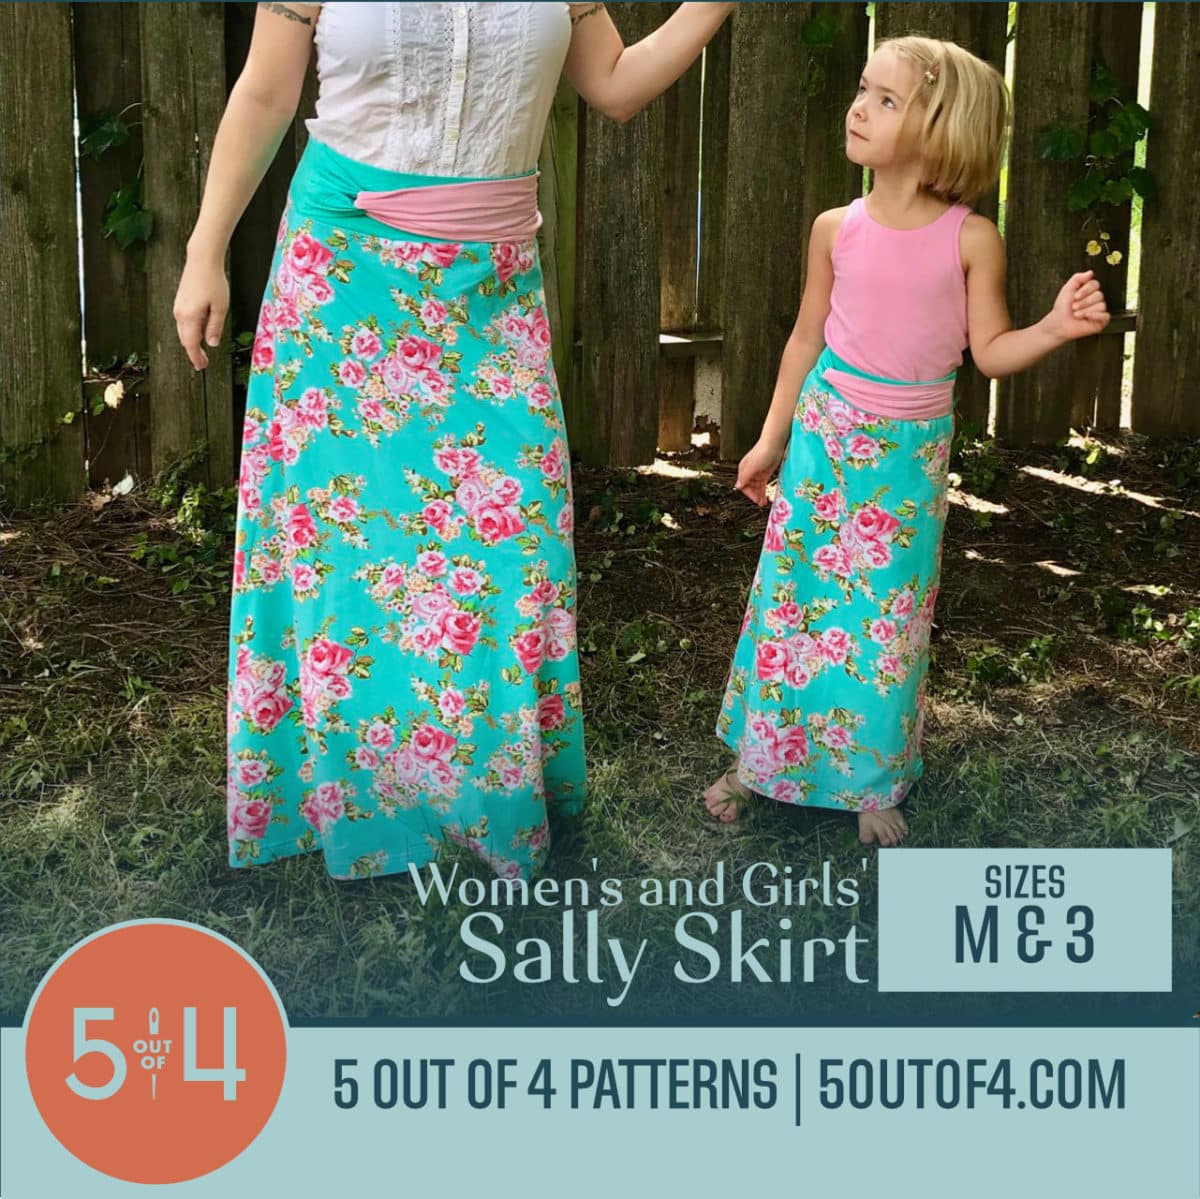 Sally Skirt Bundle - 5 out of 4 Patterns